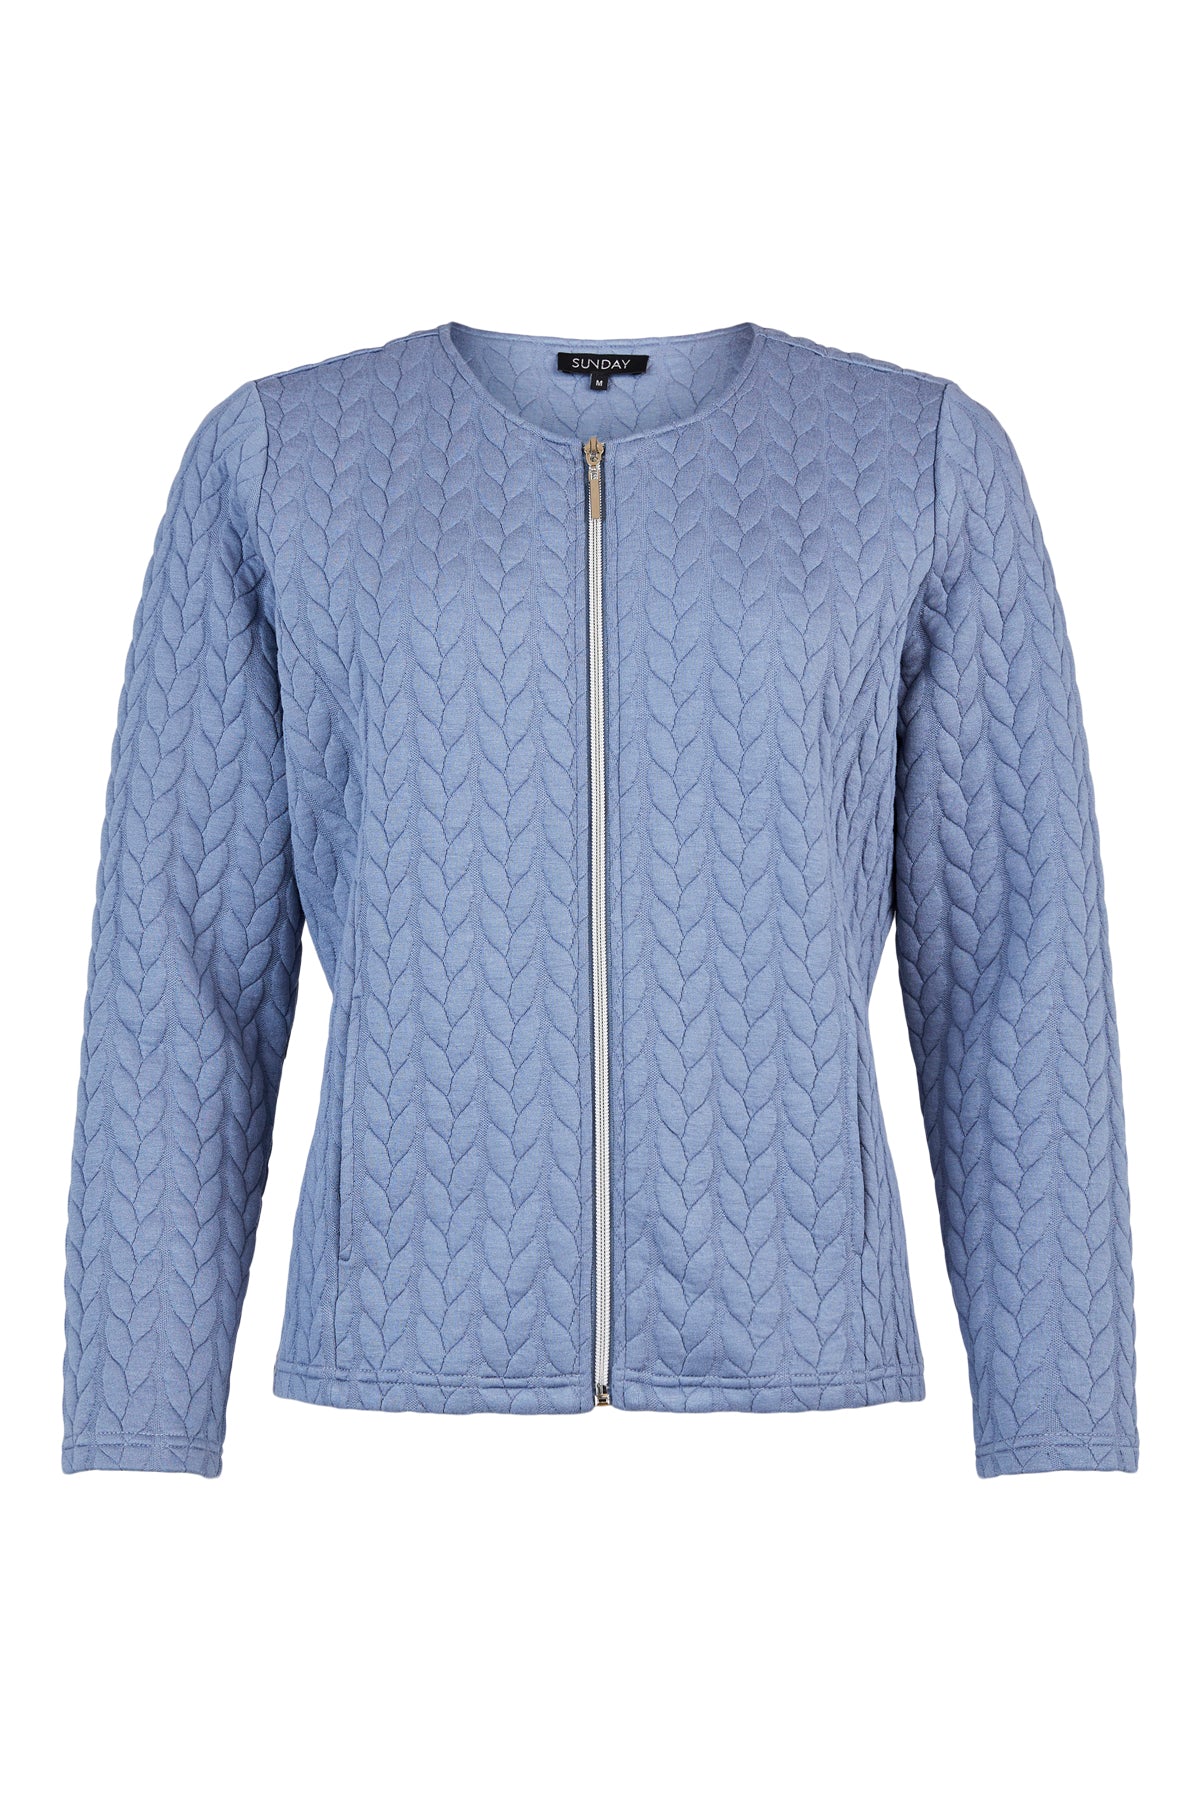 Sunday Pewter Blue Quilted Jacket